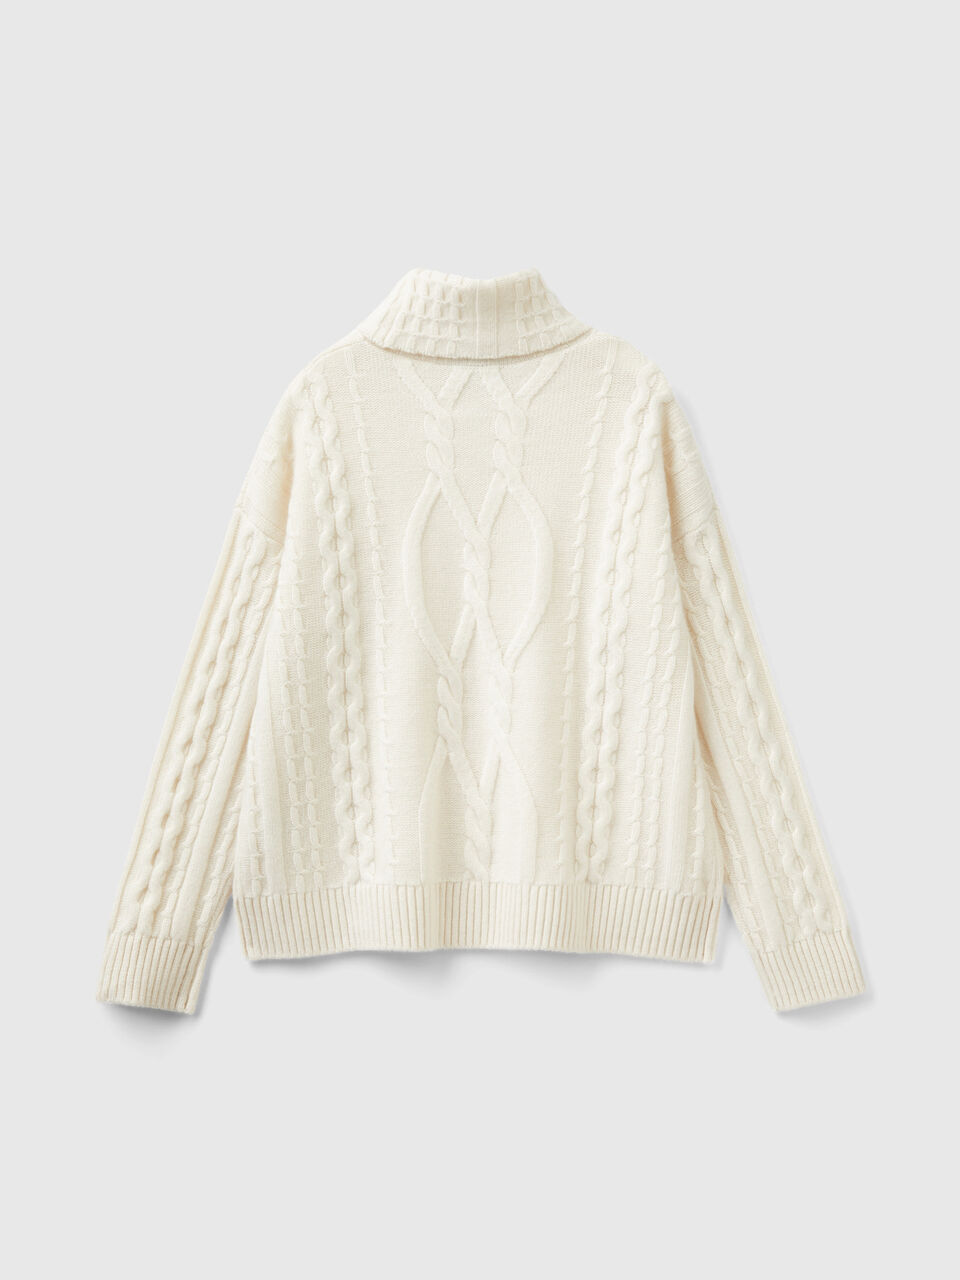 White Sweater - Turtle Neck Sweater - Beige Cable Knit Sweater